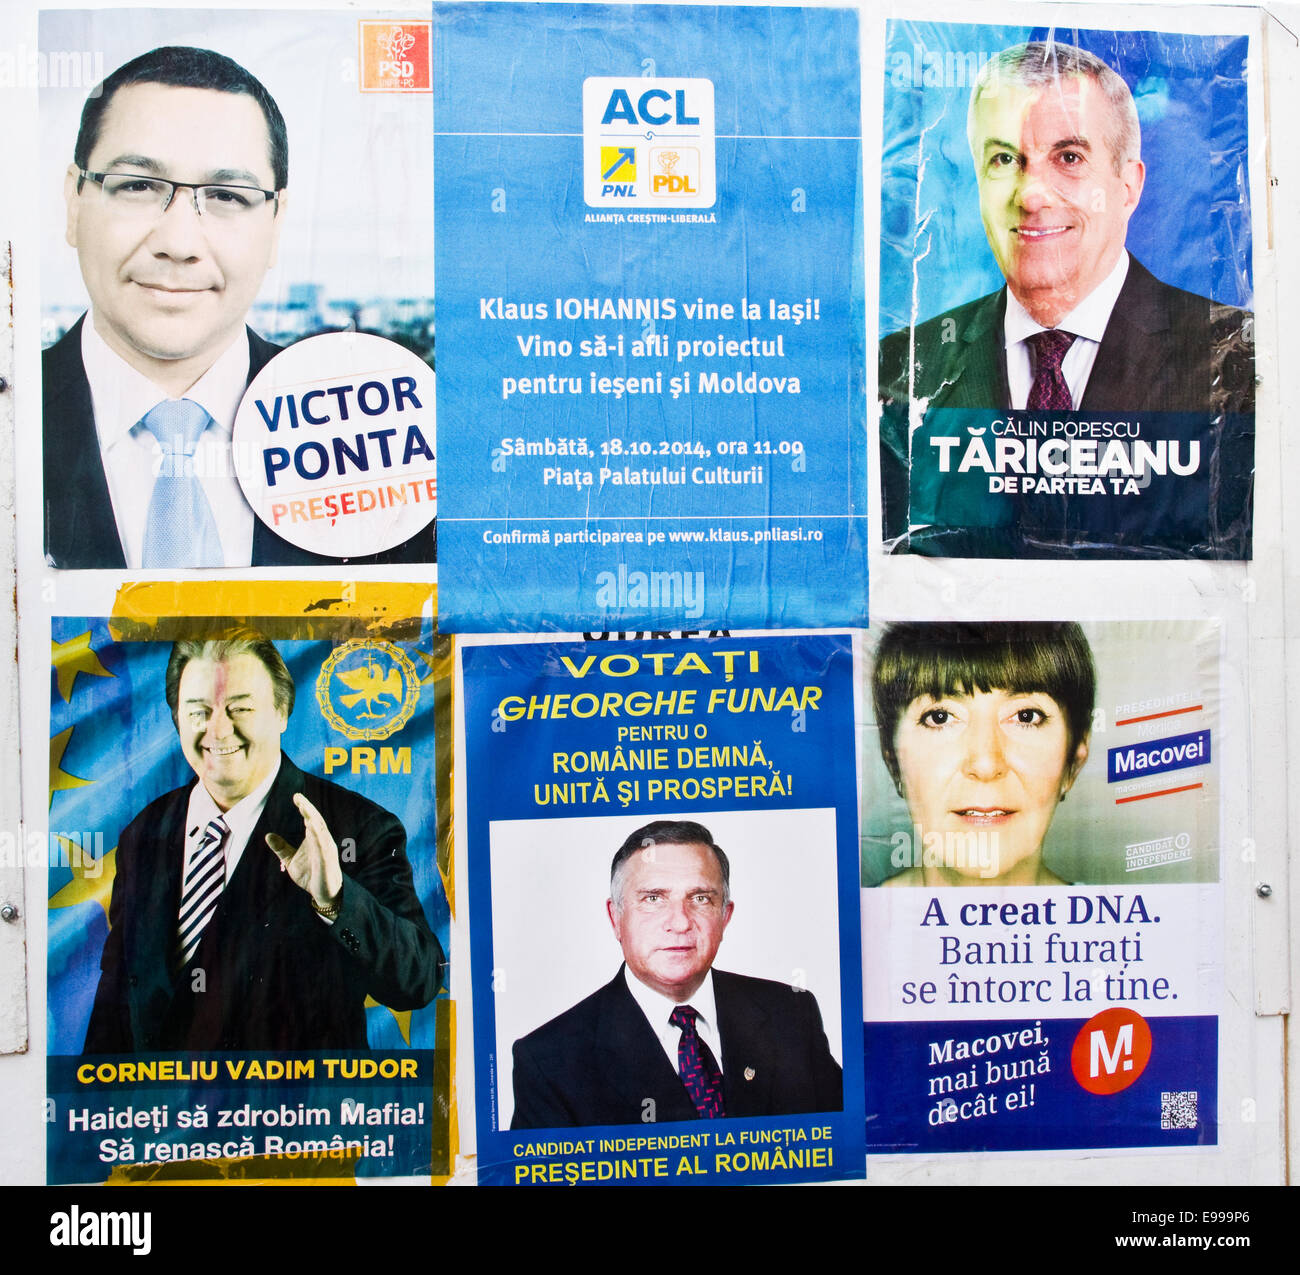 Campaign posters - Elections for President in Romania - Romanian presidential election November 2014 Stock Photo